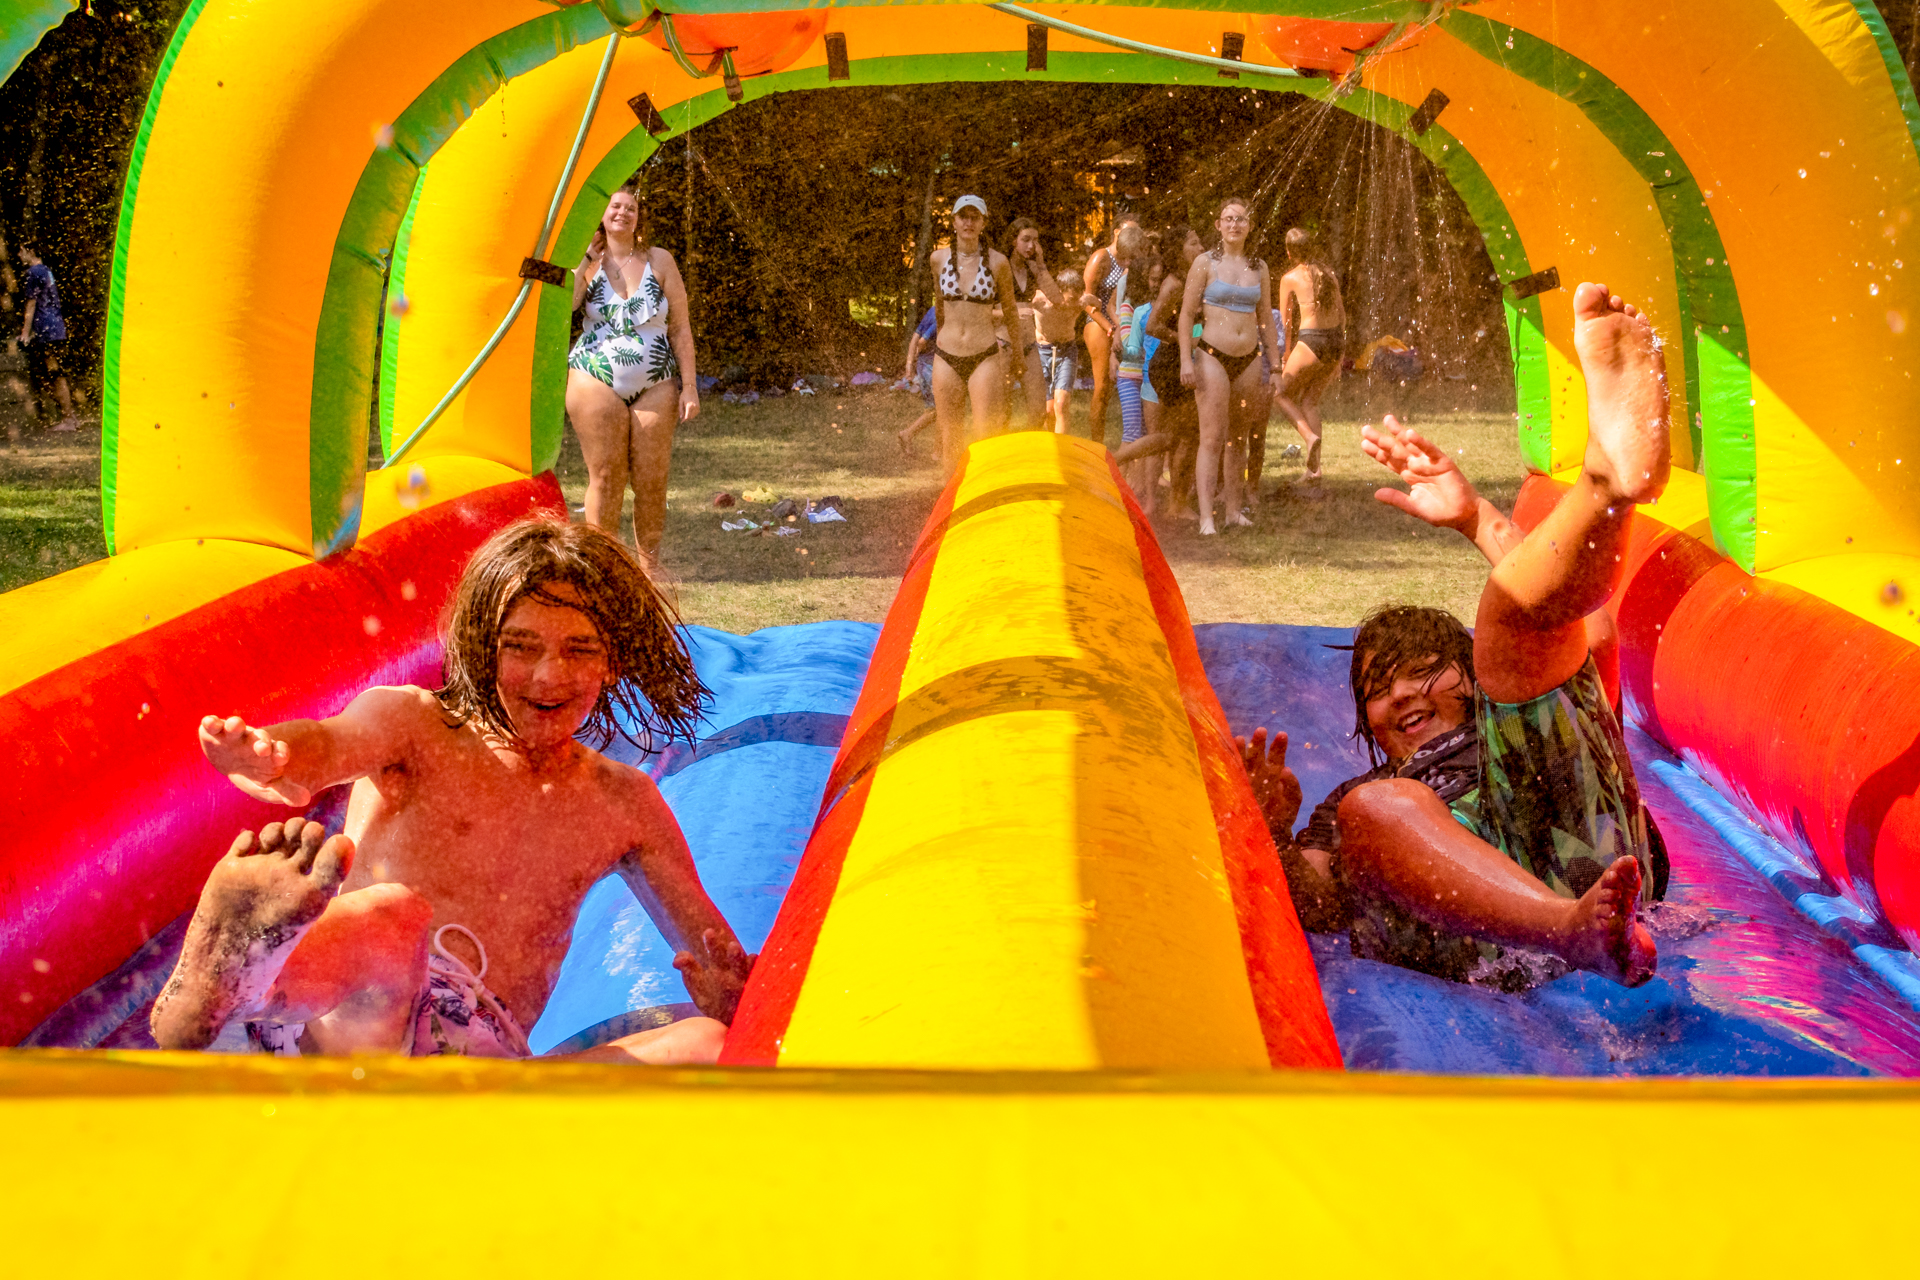 Two laughing campers are sliding down an inflatable waterslide with hoses spraying water down from above. In the background, a group of campers waits for their turn.